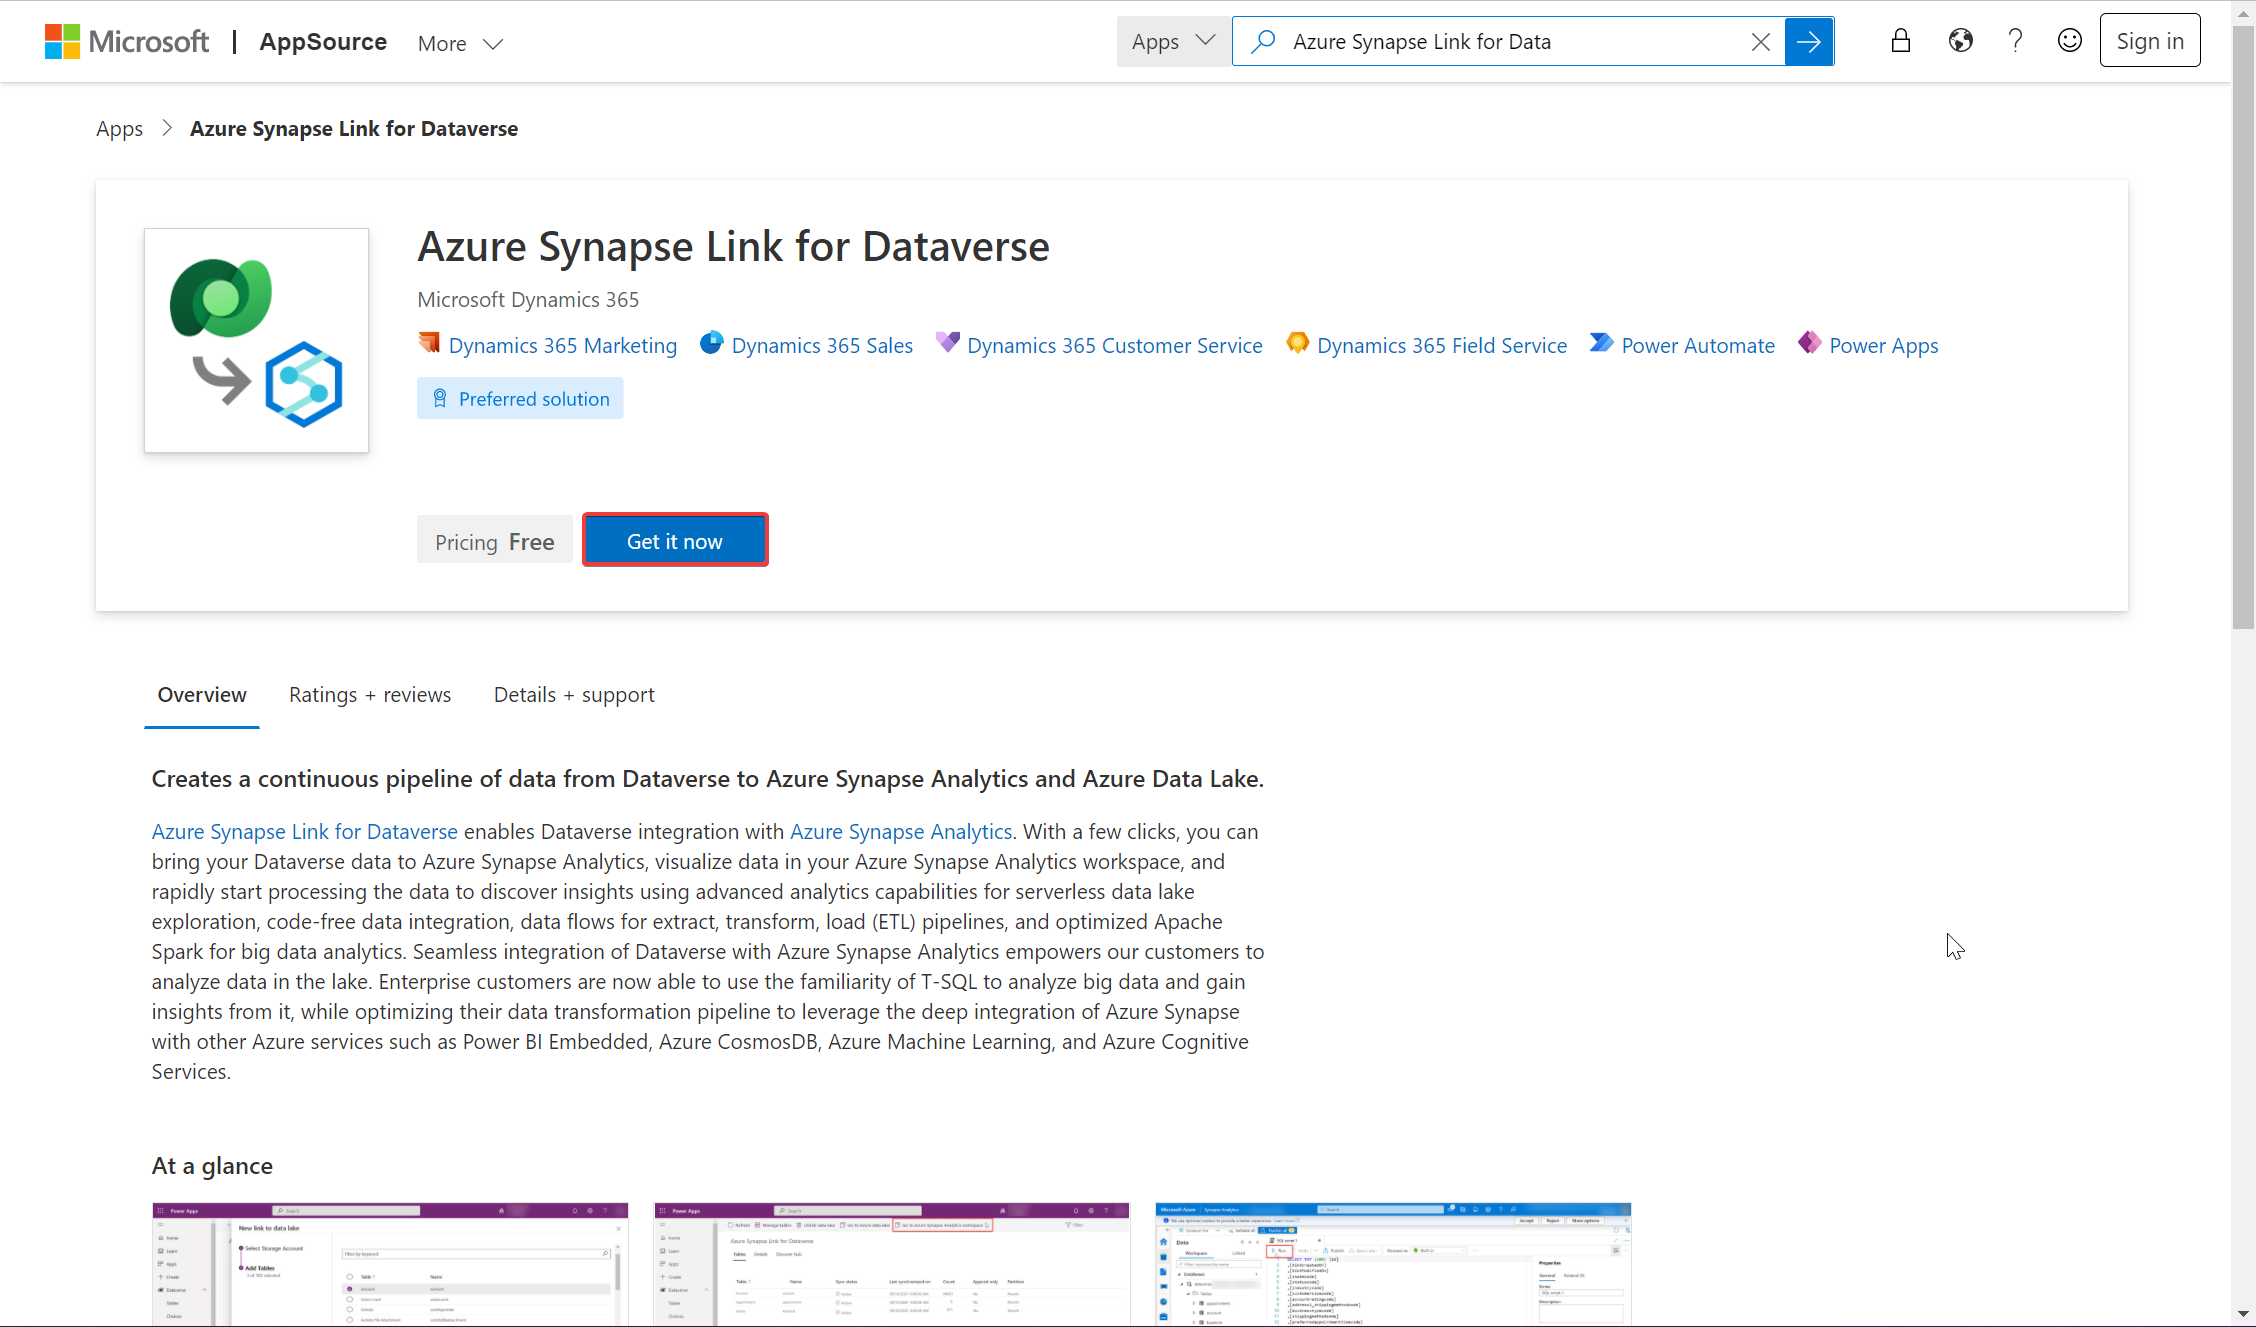 Azure Synapse Link for Dataverse Solution